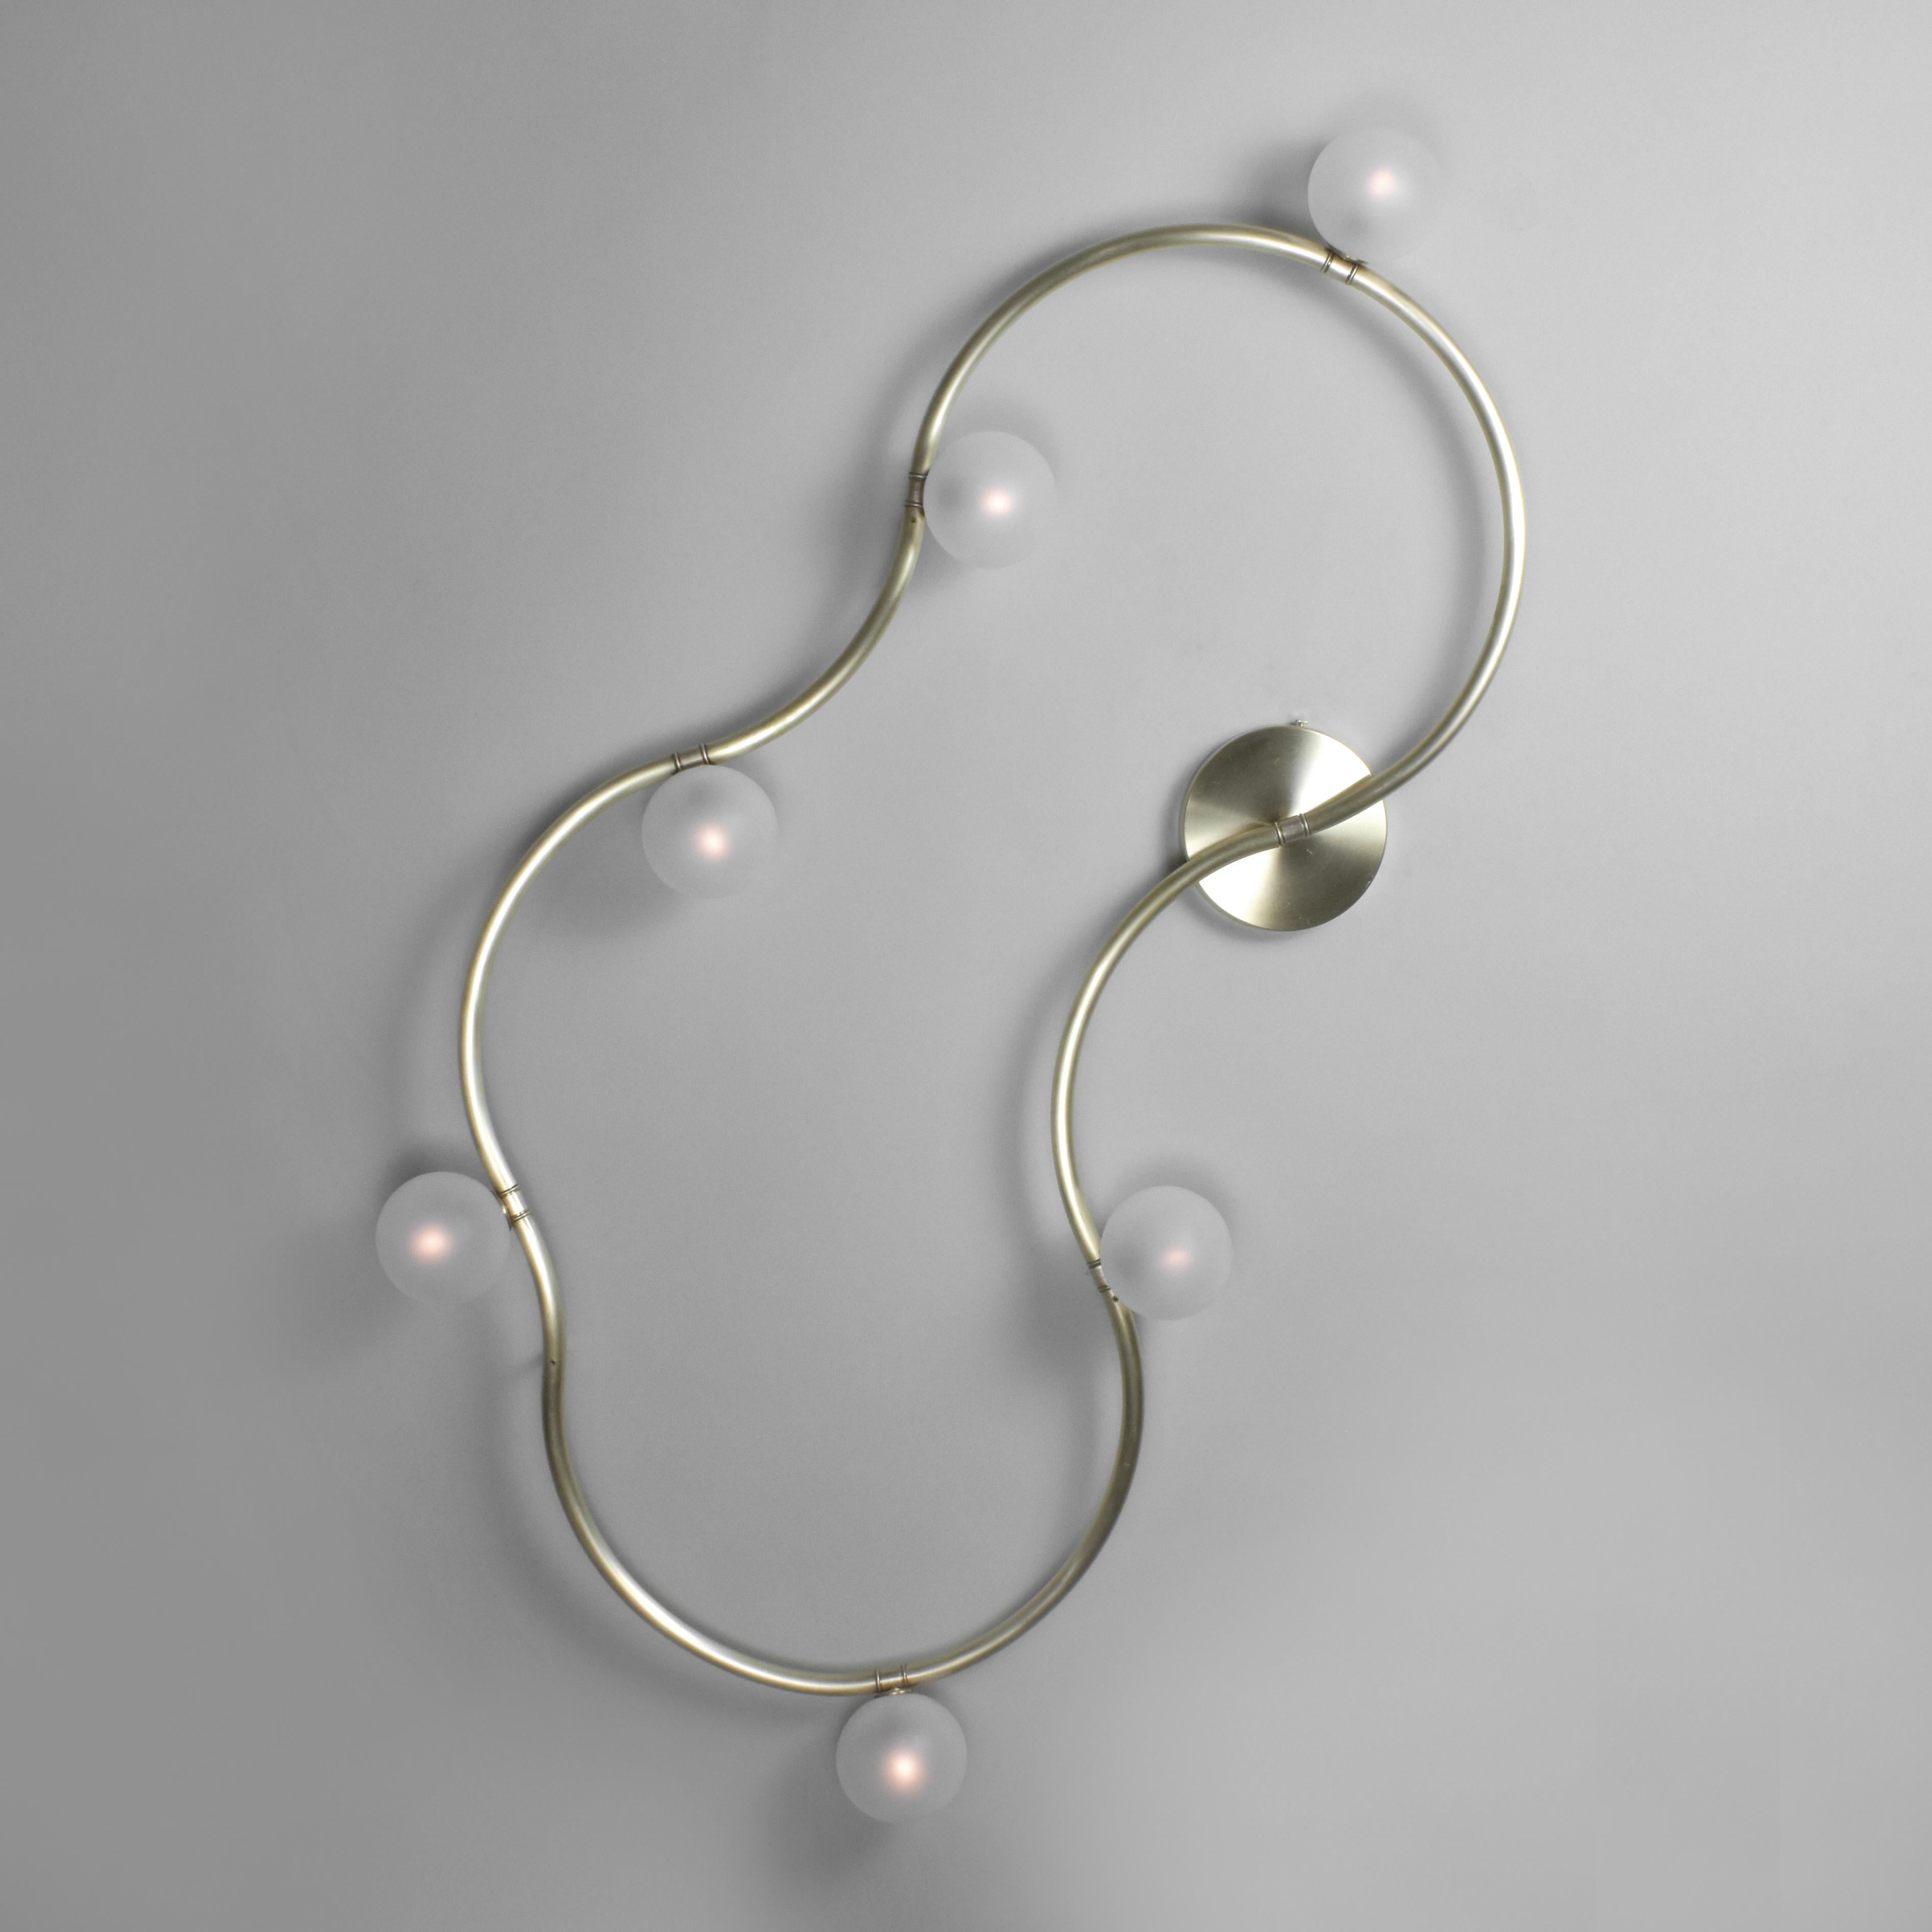 Modular Lighting designed and produced by Talbot & Yoon.

The Loop Light uses a bent brass tube and diamond tiling pattern composed of two unique shapes to create an endless variety of looped and squiggly wall sconces. 

The Loop Light is